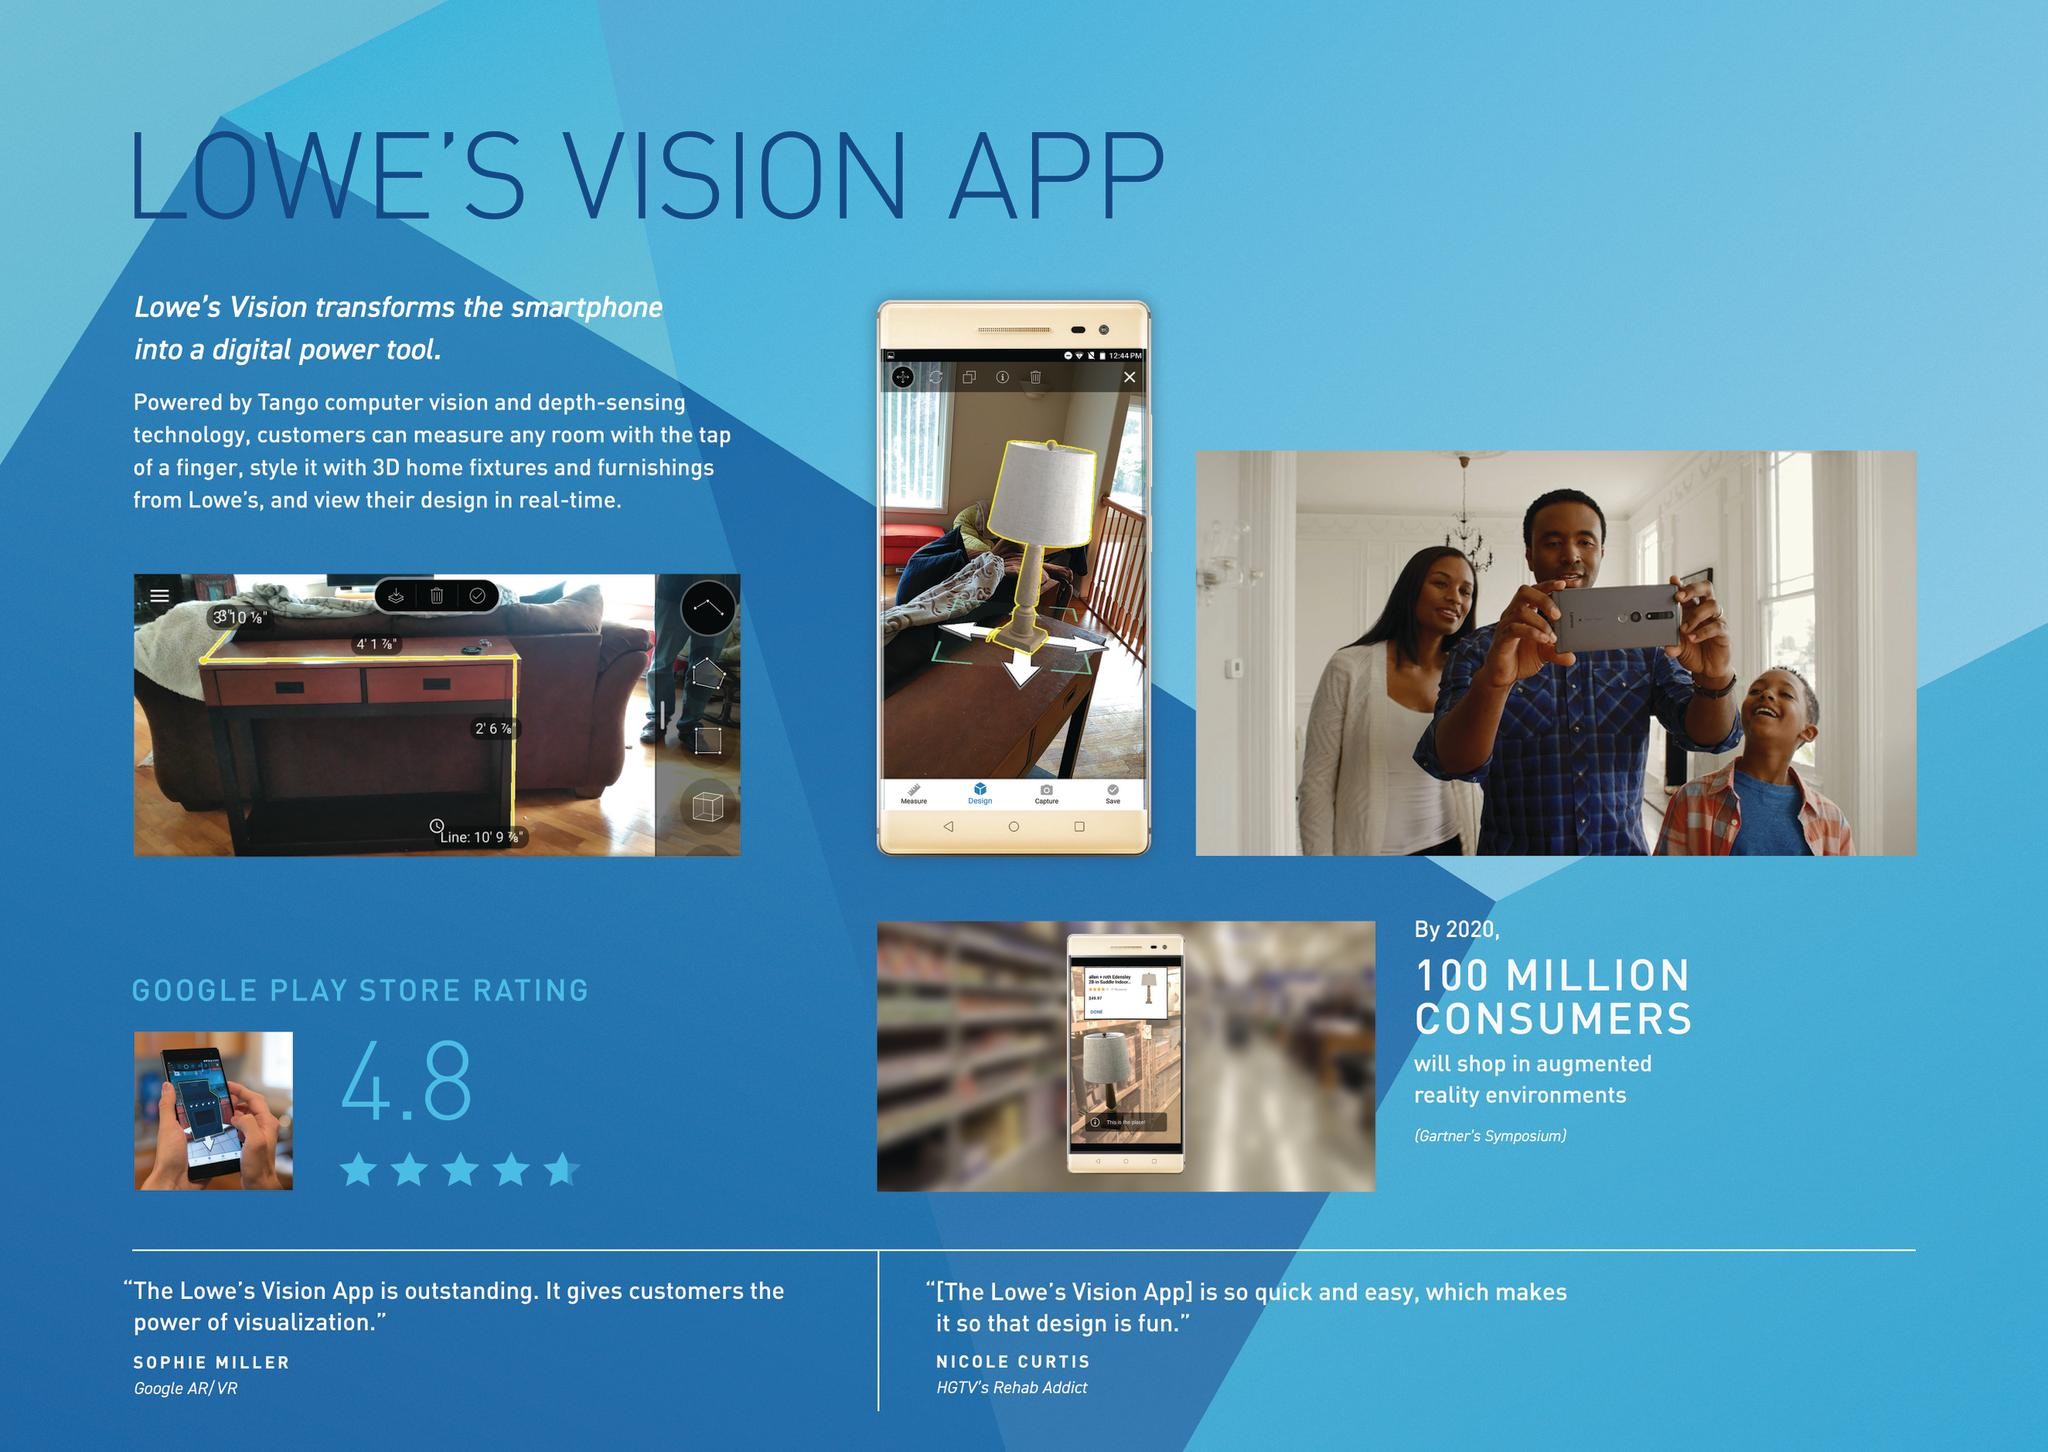 LOWE'S VISION APPLICATION